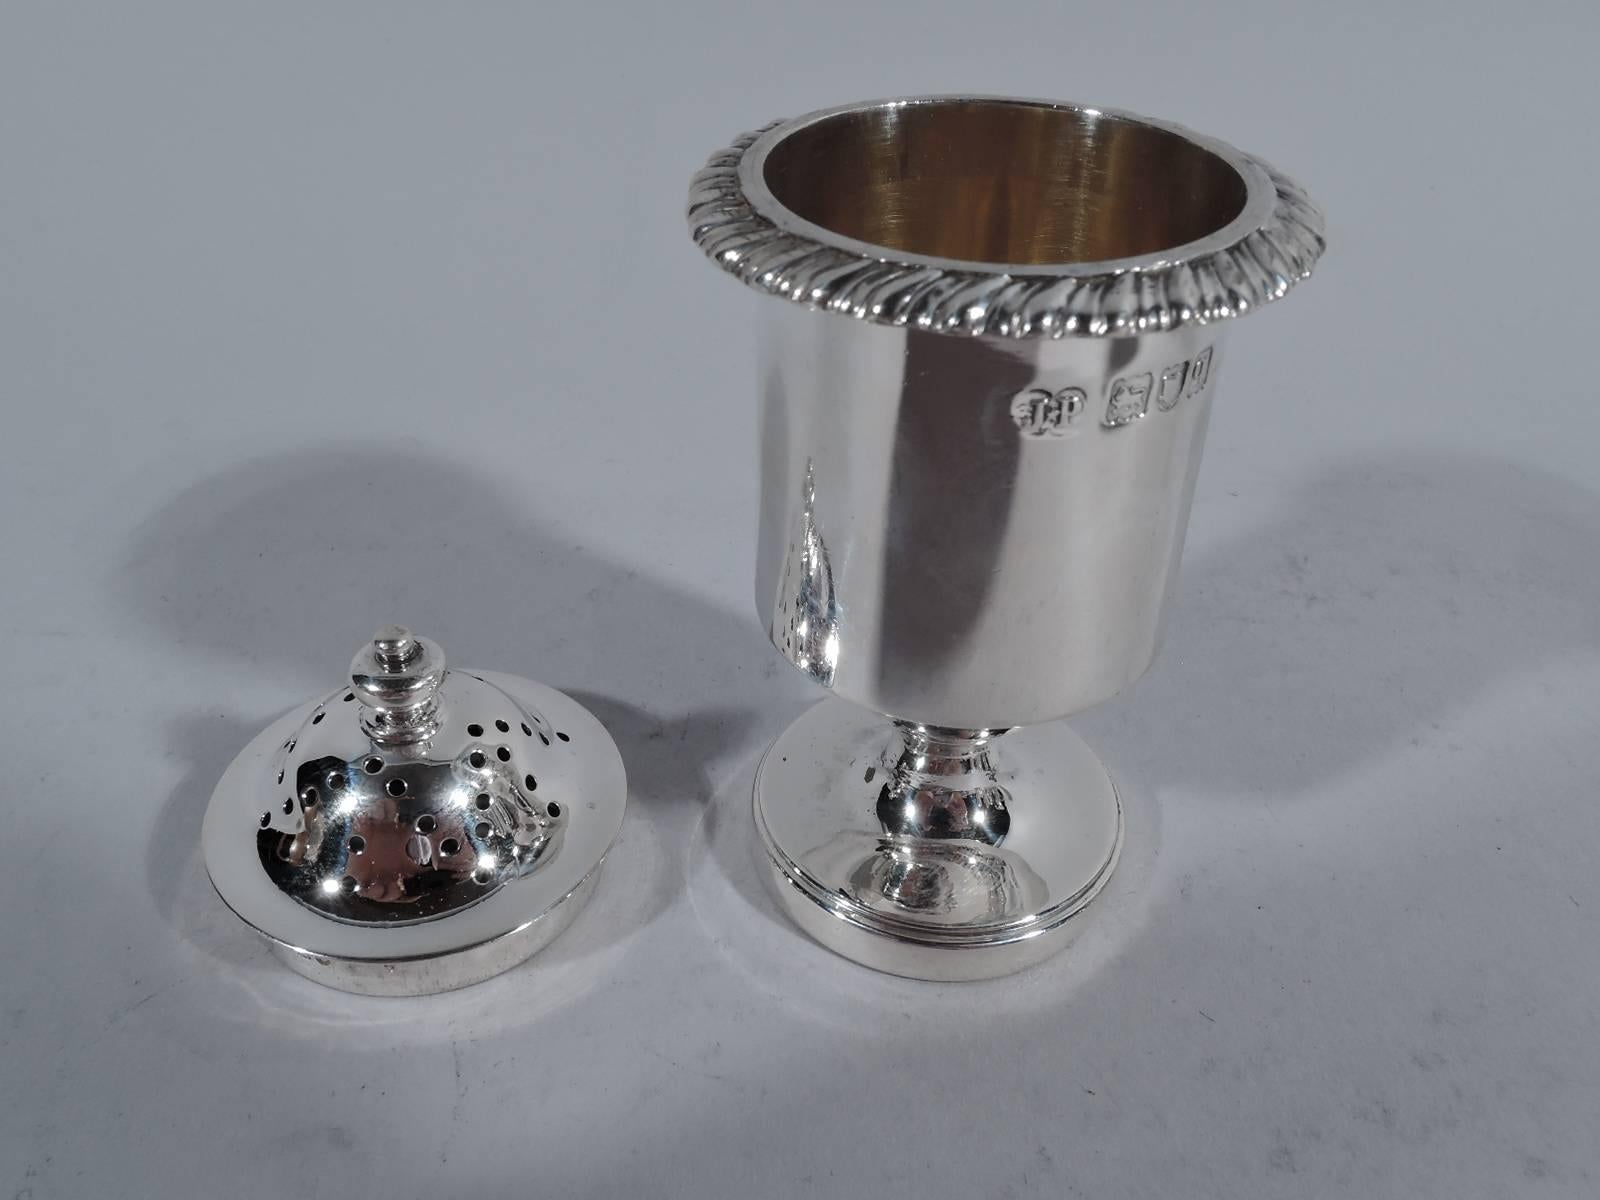 George V sterling silver pepper pot. Made by J. Parkes in London in 1911. Drum body, gadrooned flange, domed cover with pierced star and vase finial, and raised stepped foot. Interior has soft gilt wash. Hallmarked. Weight: 2.6 troy ounces.